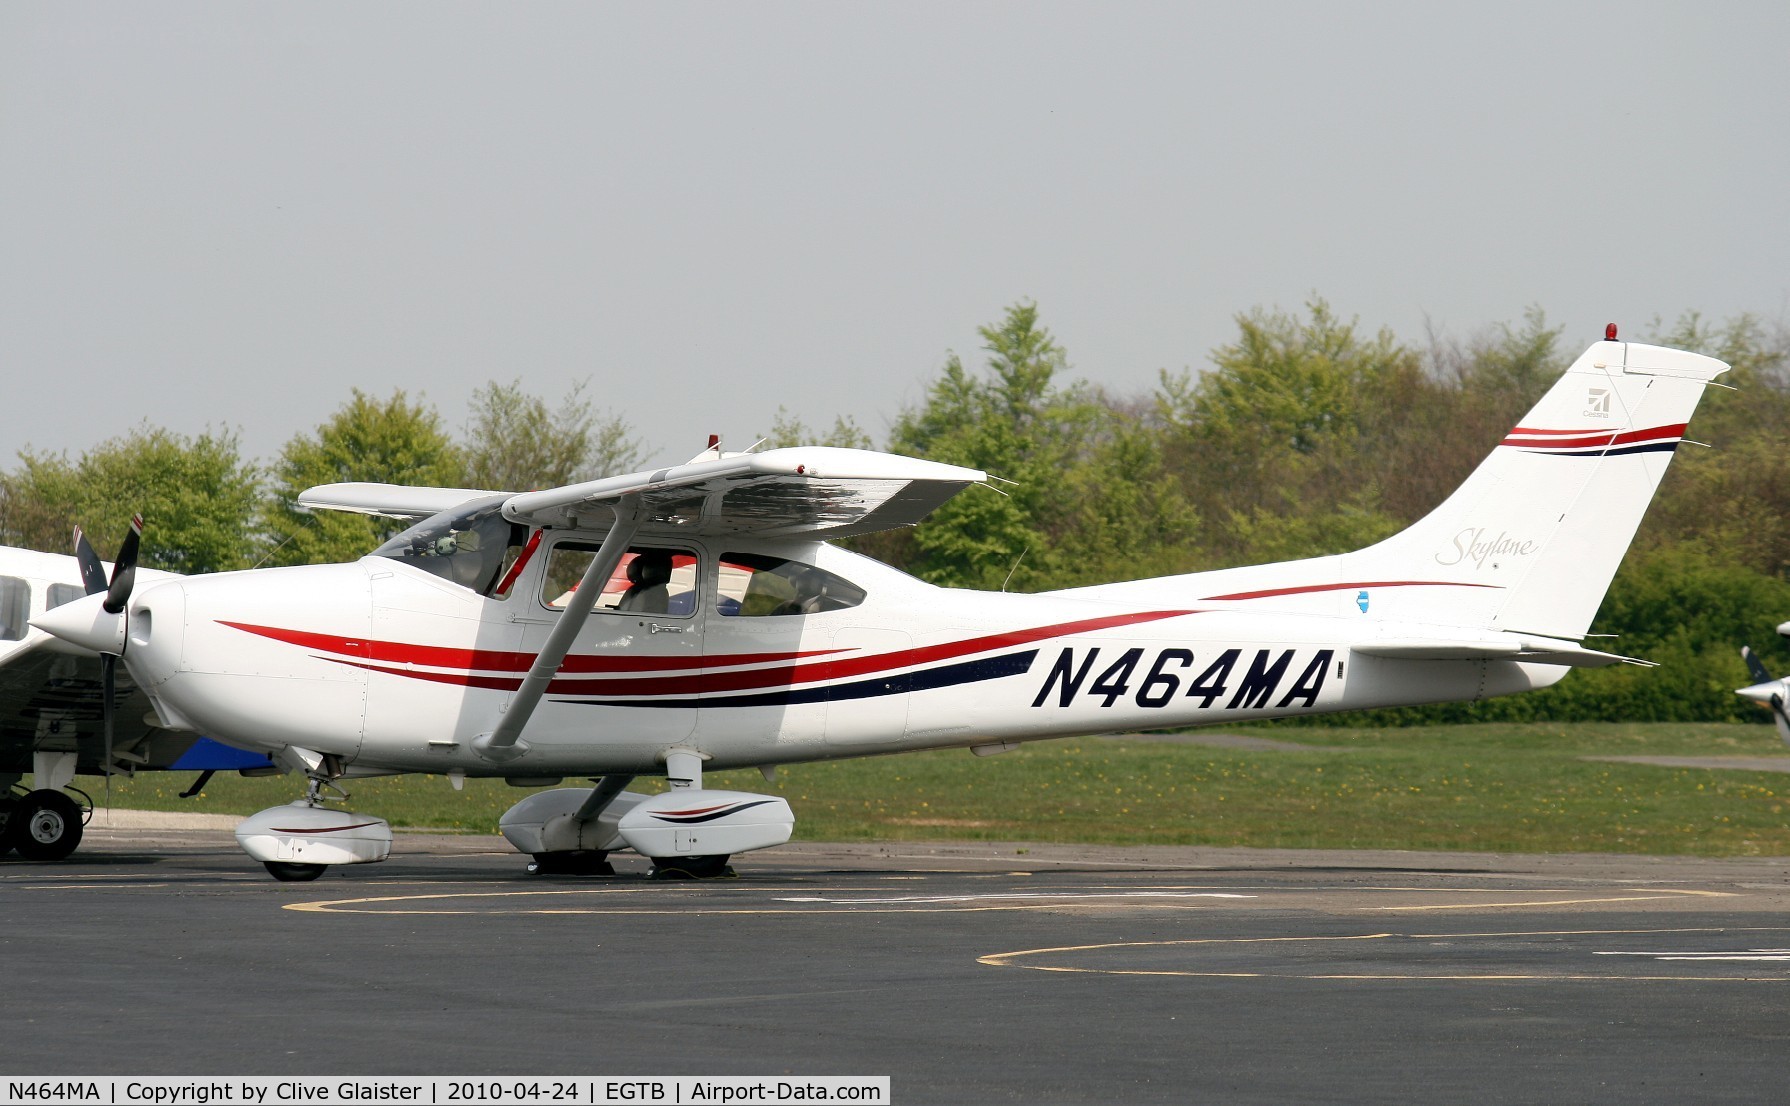 N464MA, 2000 Cessna 182S Skylane C/N 18280822, Registered Owner: SOUTHERN AIRCRAFT CONSULTANCY INC TRUSTEE